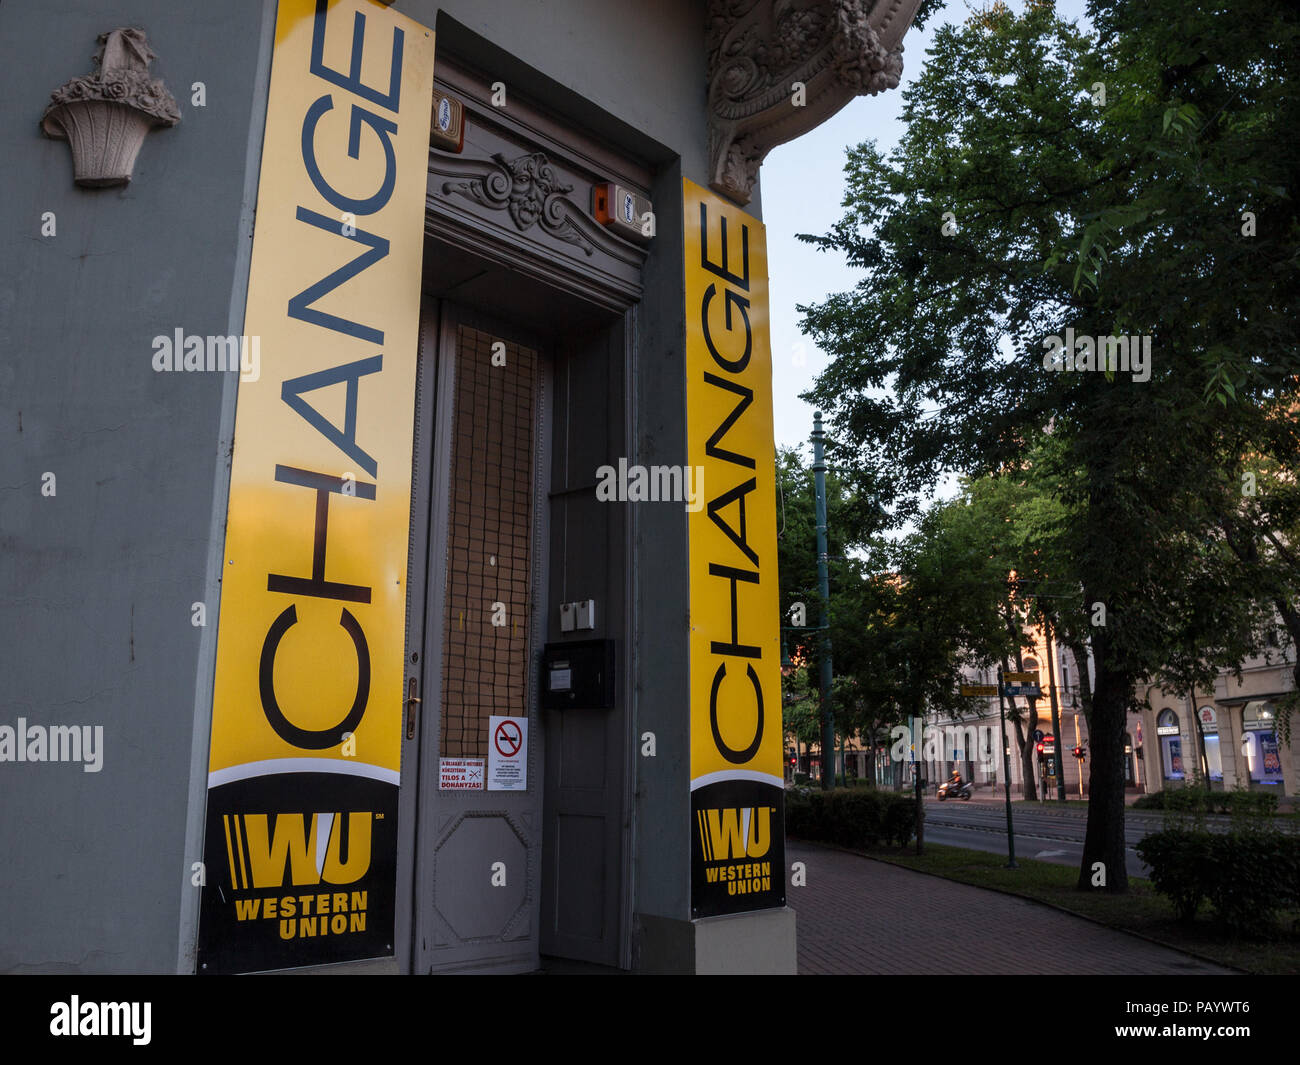 SZEGED, HUNGARY - JULY 3, 2018: Western Union logo on their main exchange office for Szeged. The Western Union Company is an American financial servic Stock Photo